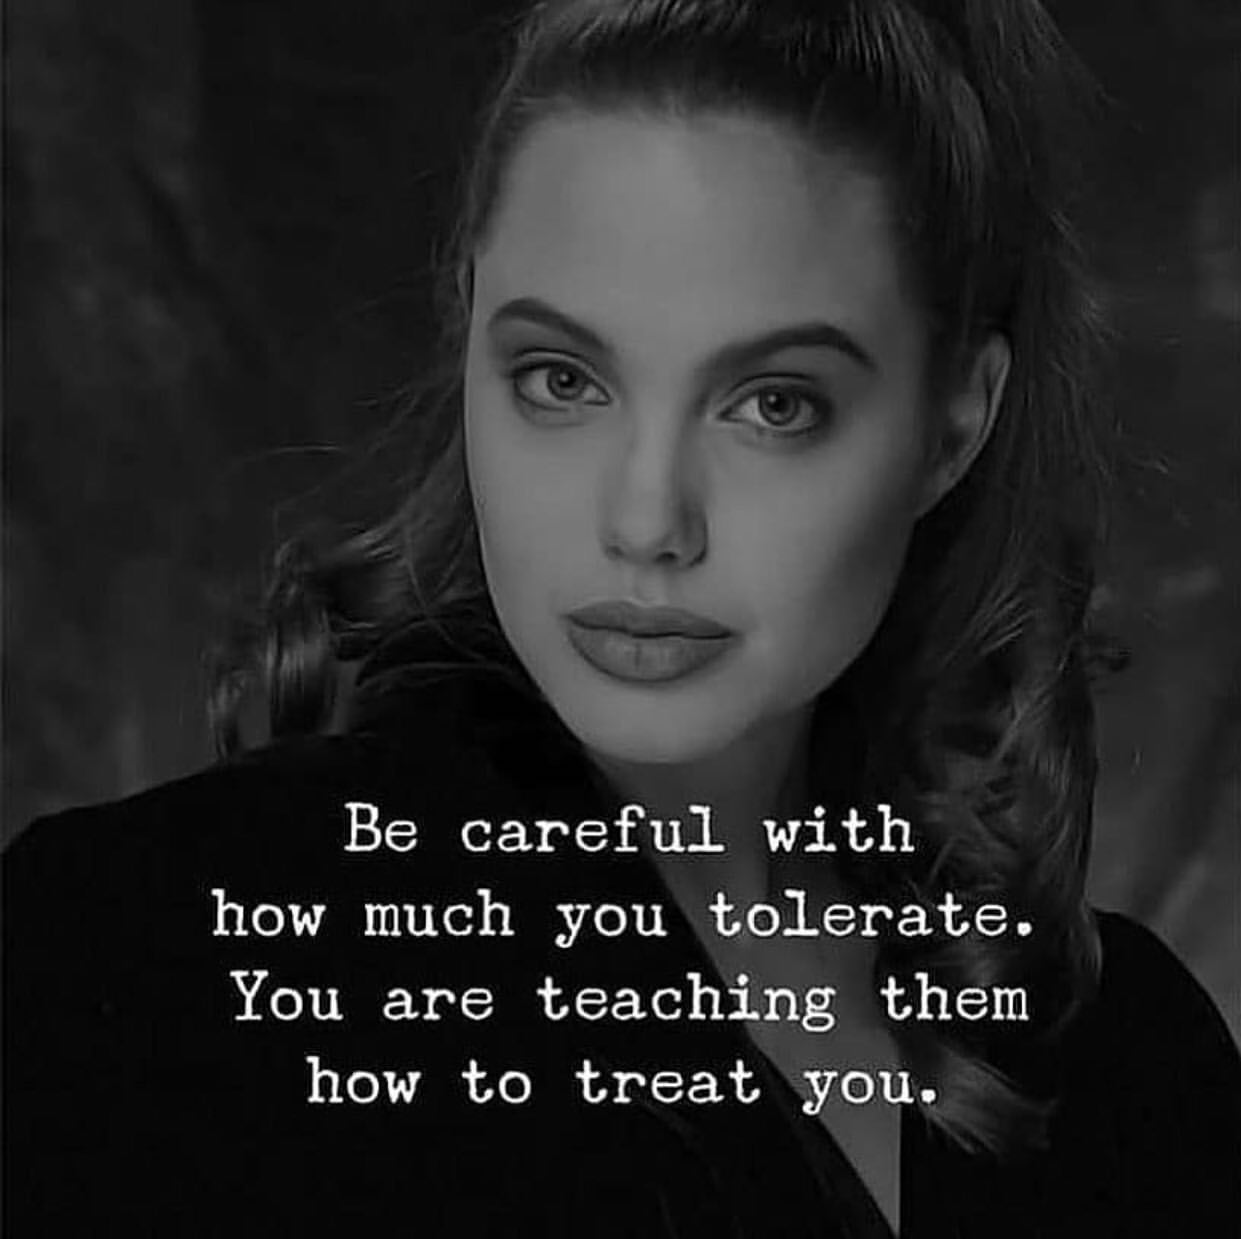 Be careful with how much you tolerate. You are teaching them how to treat you.